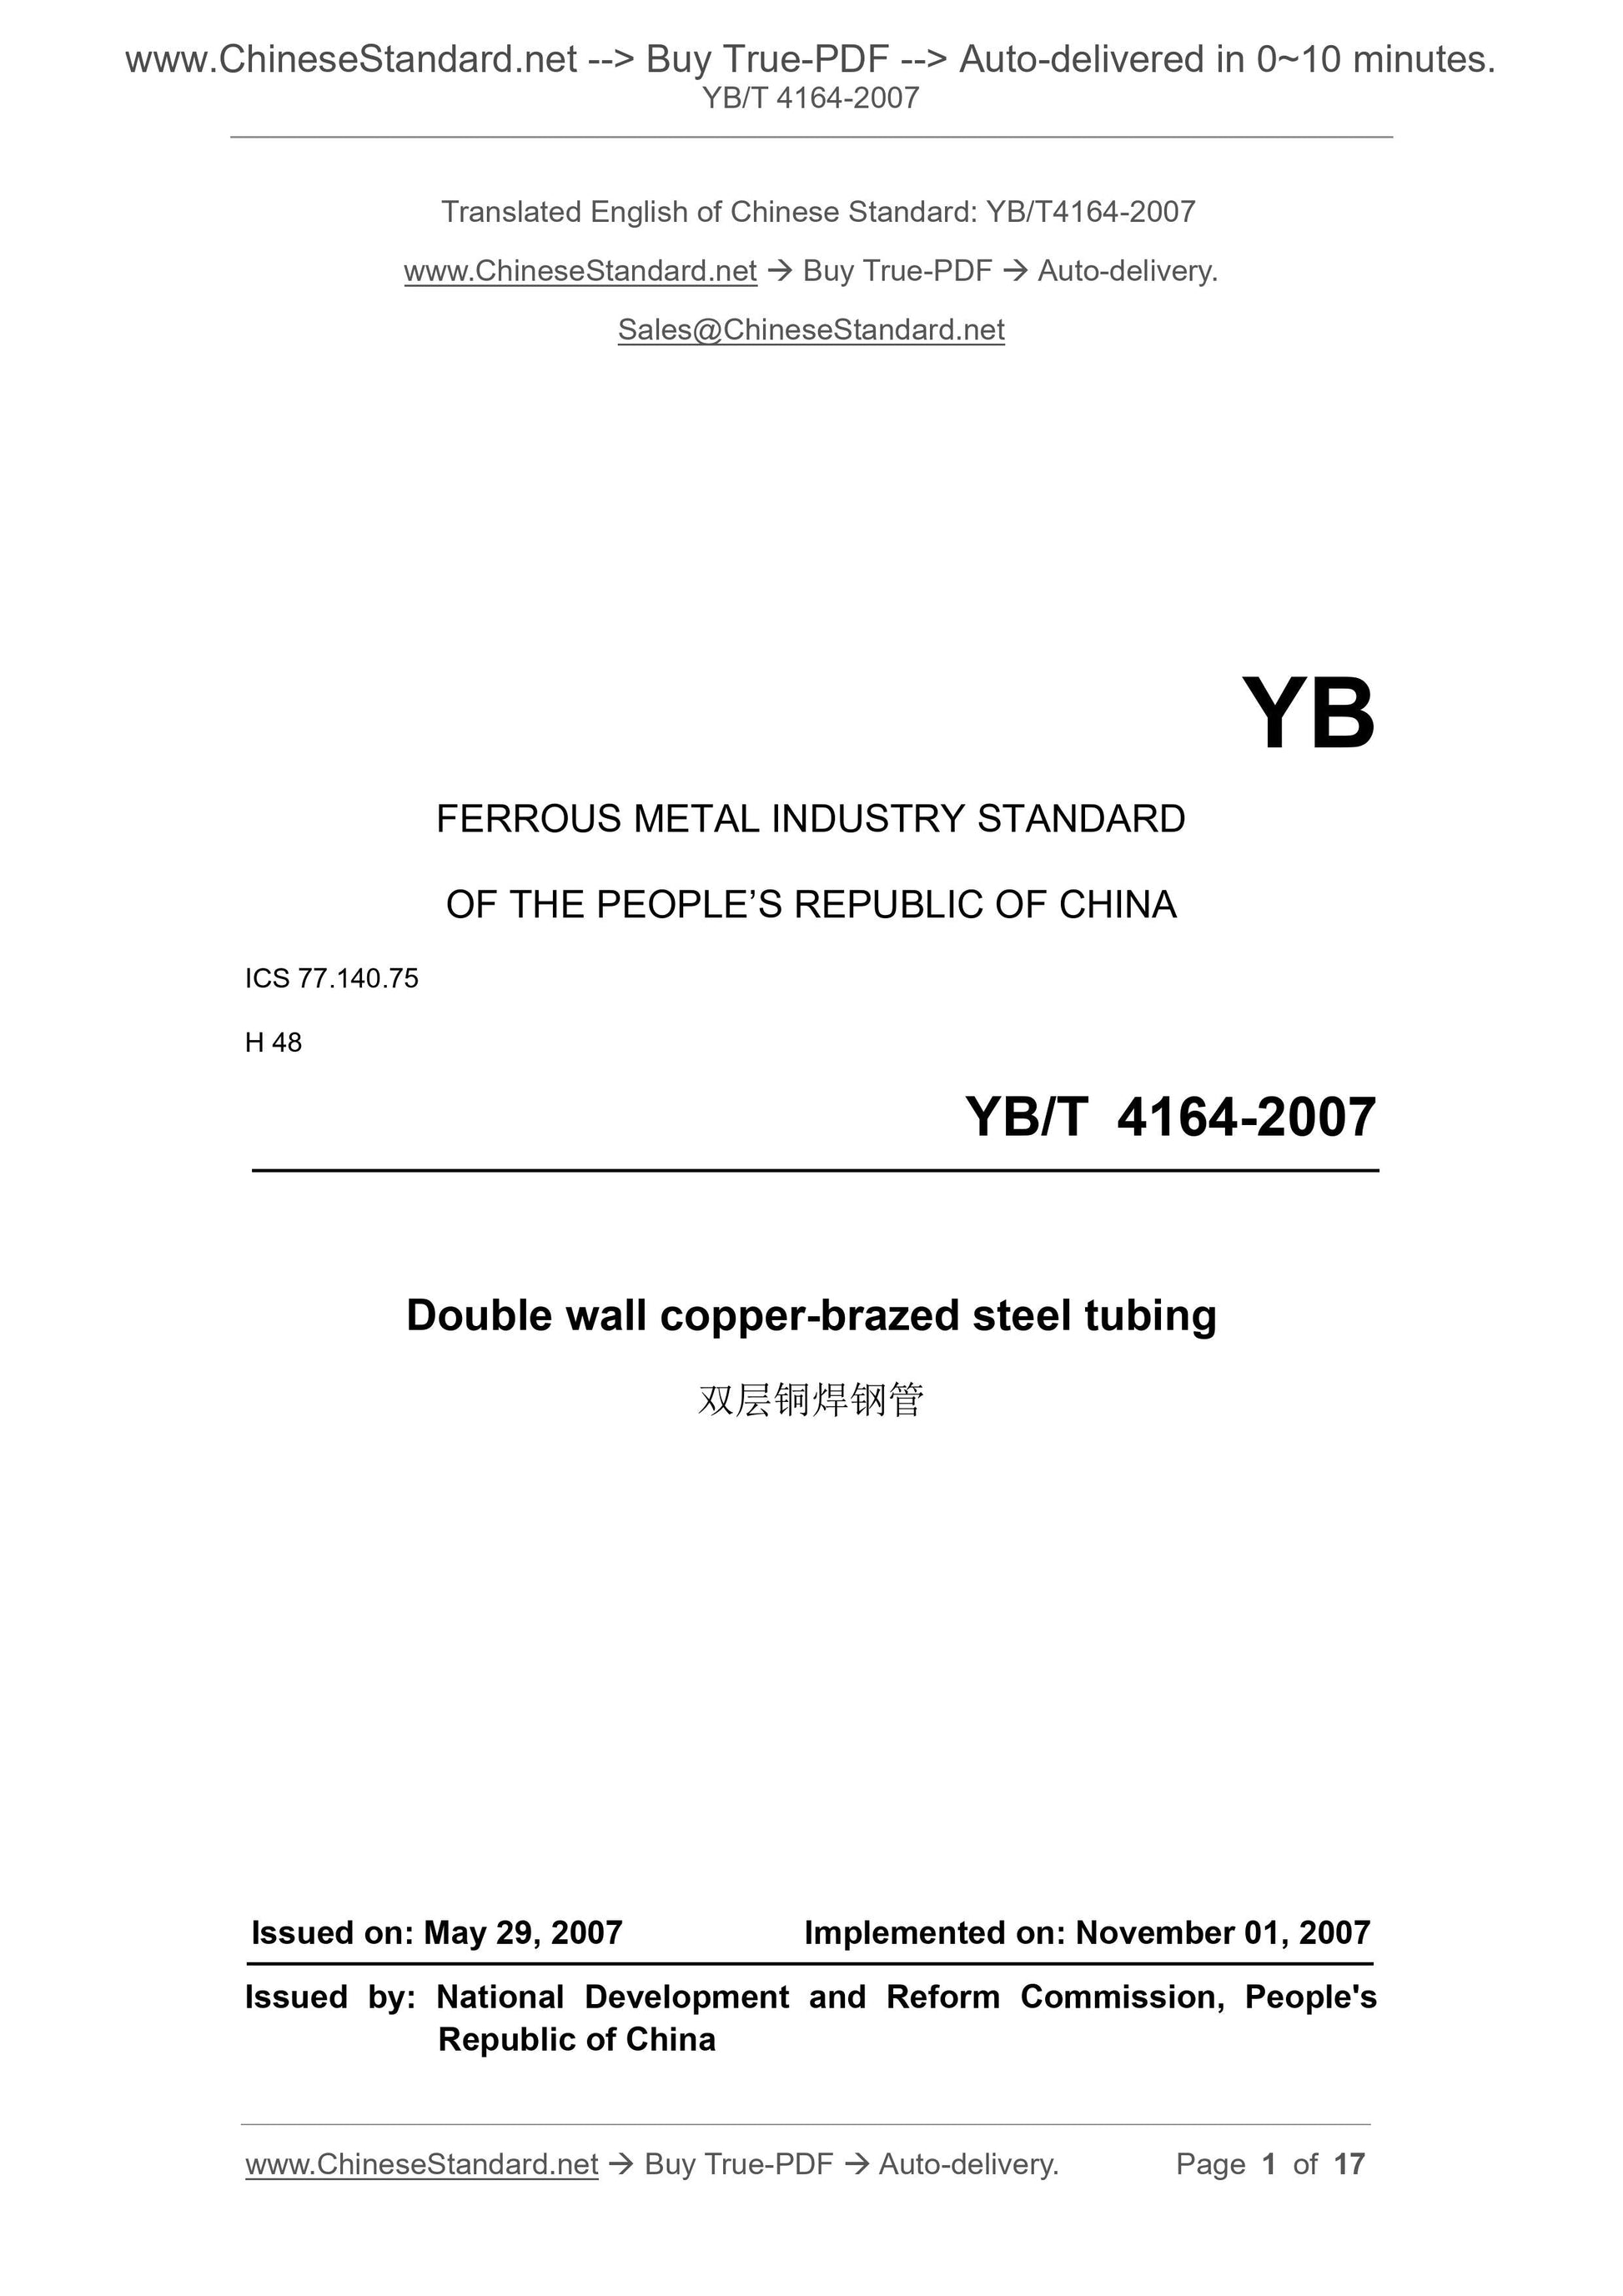 YB/T 4164-2007 Page 1